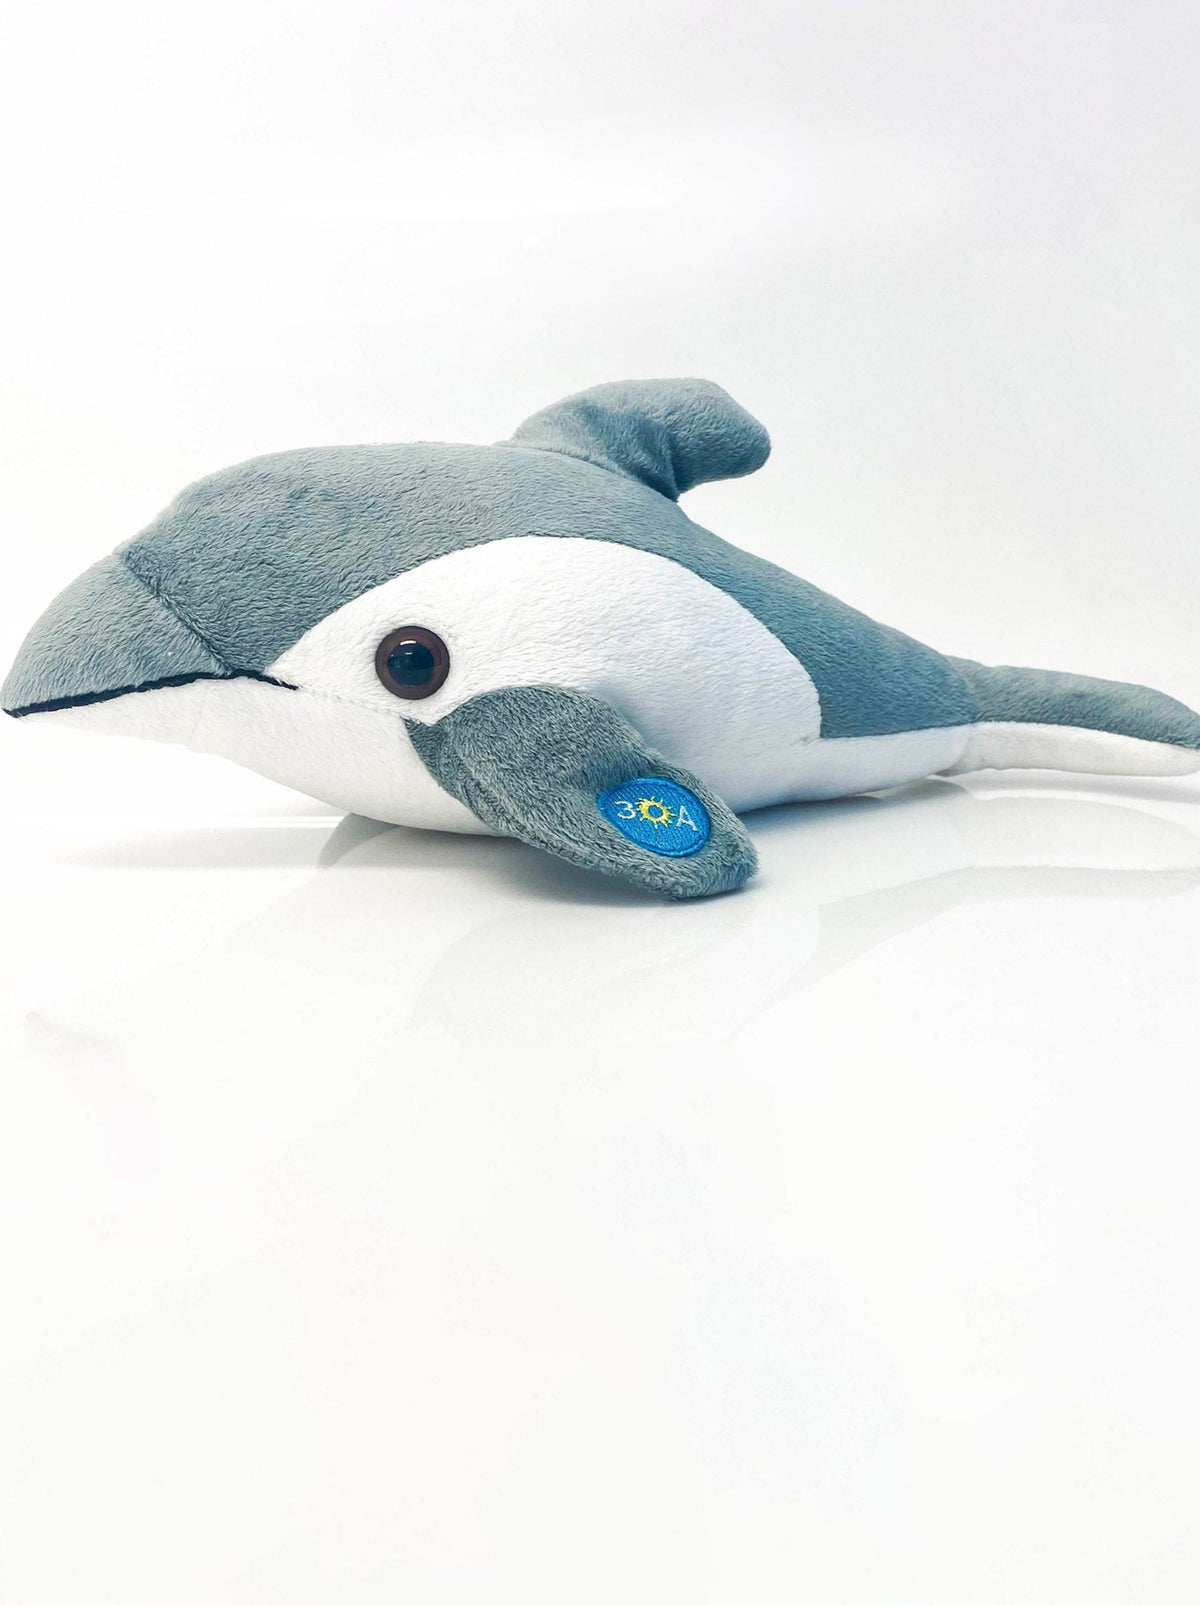 30A Dolphin Baby Plush Toy